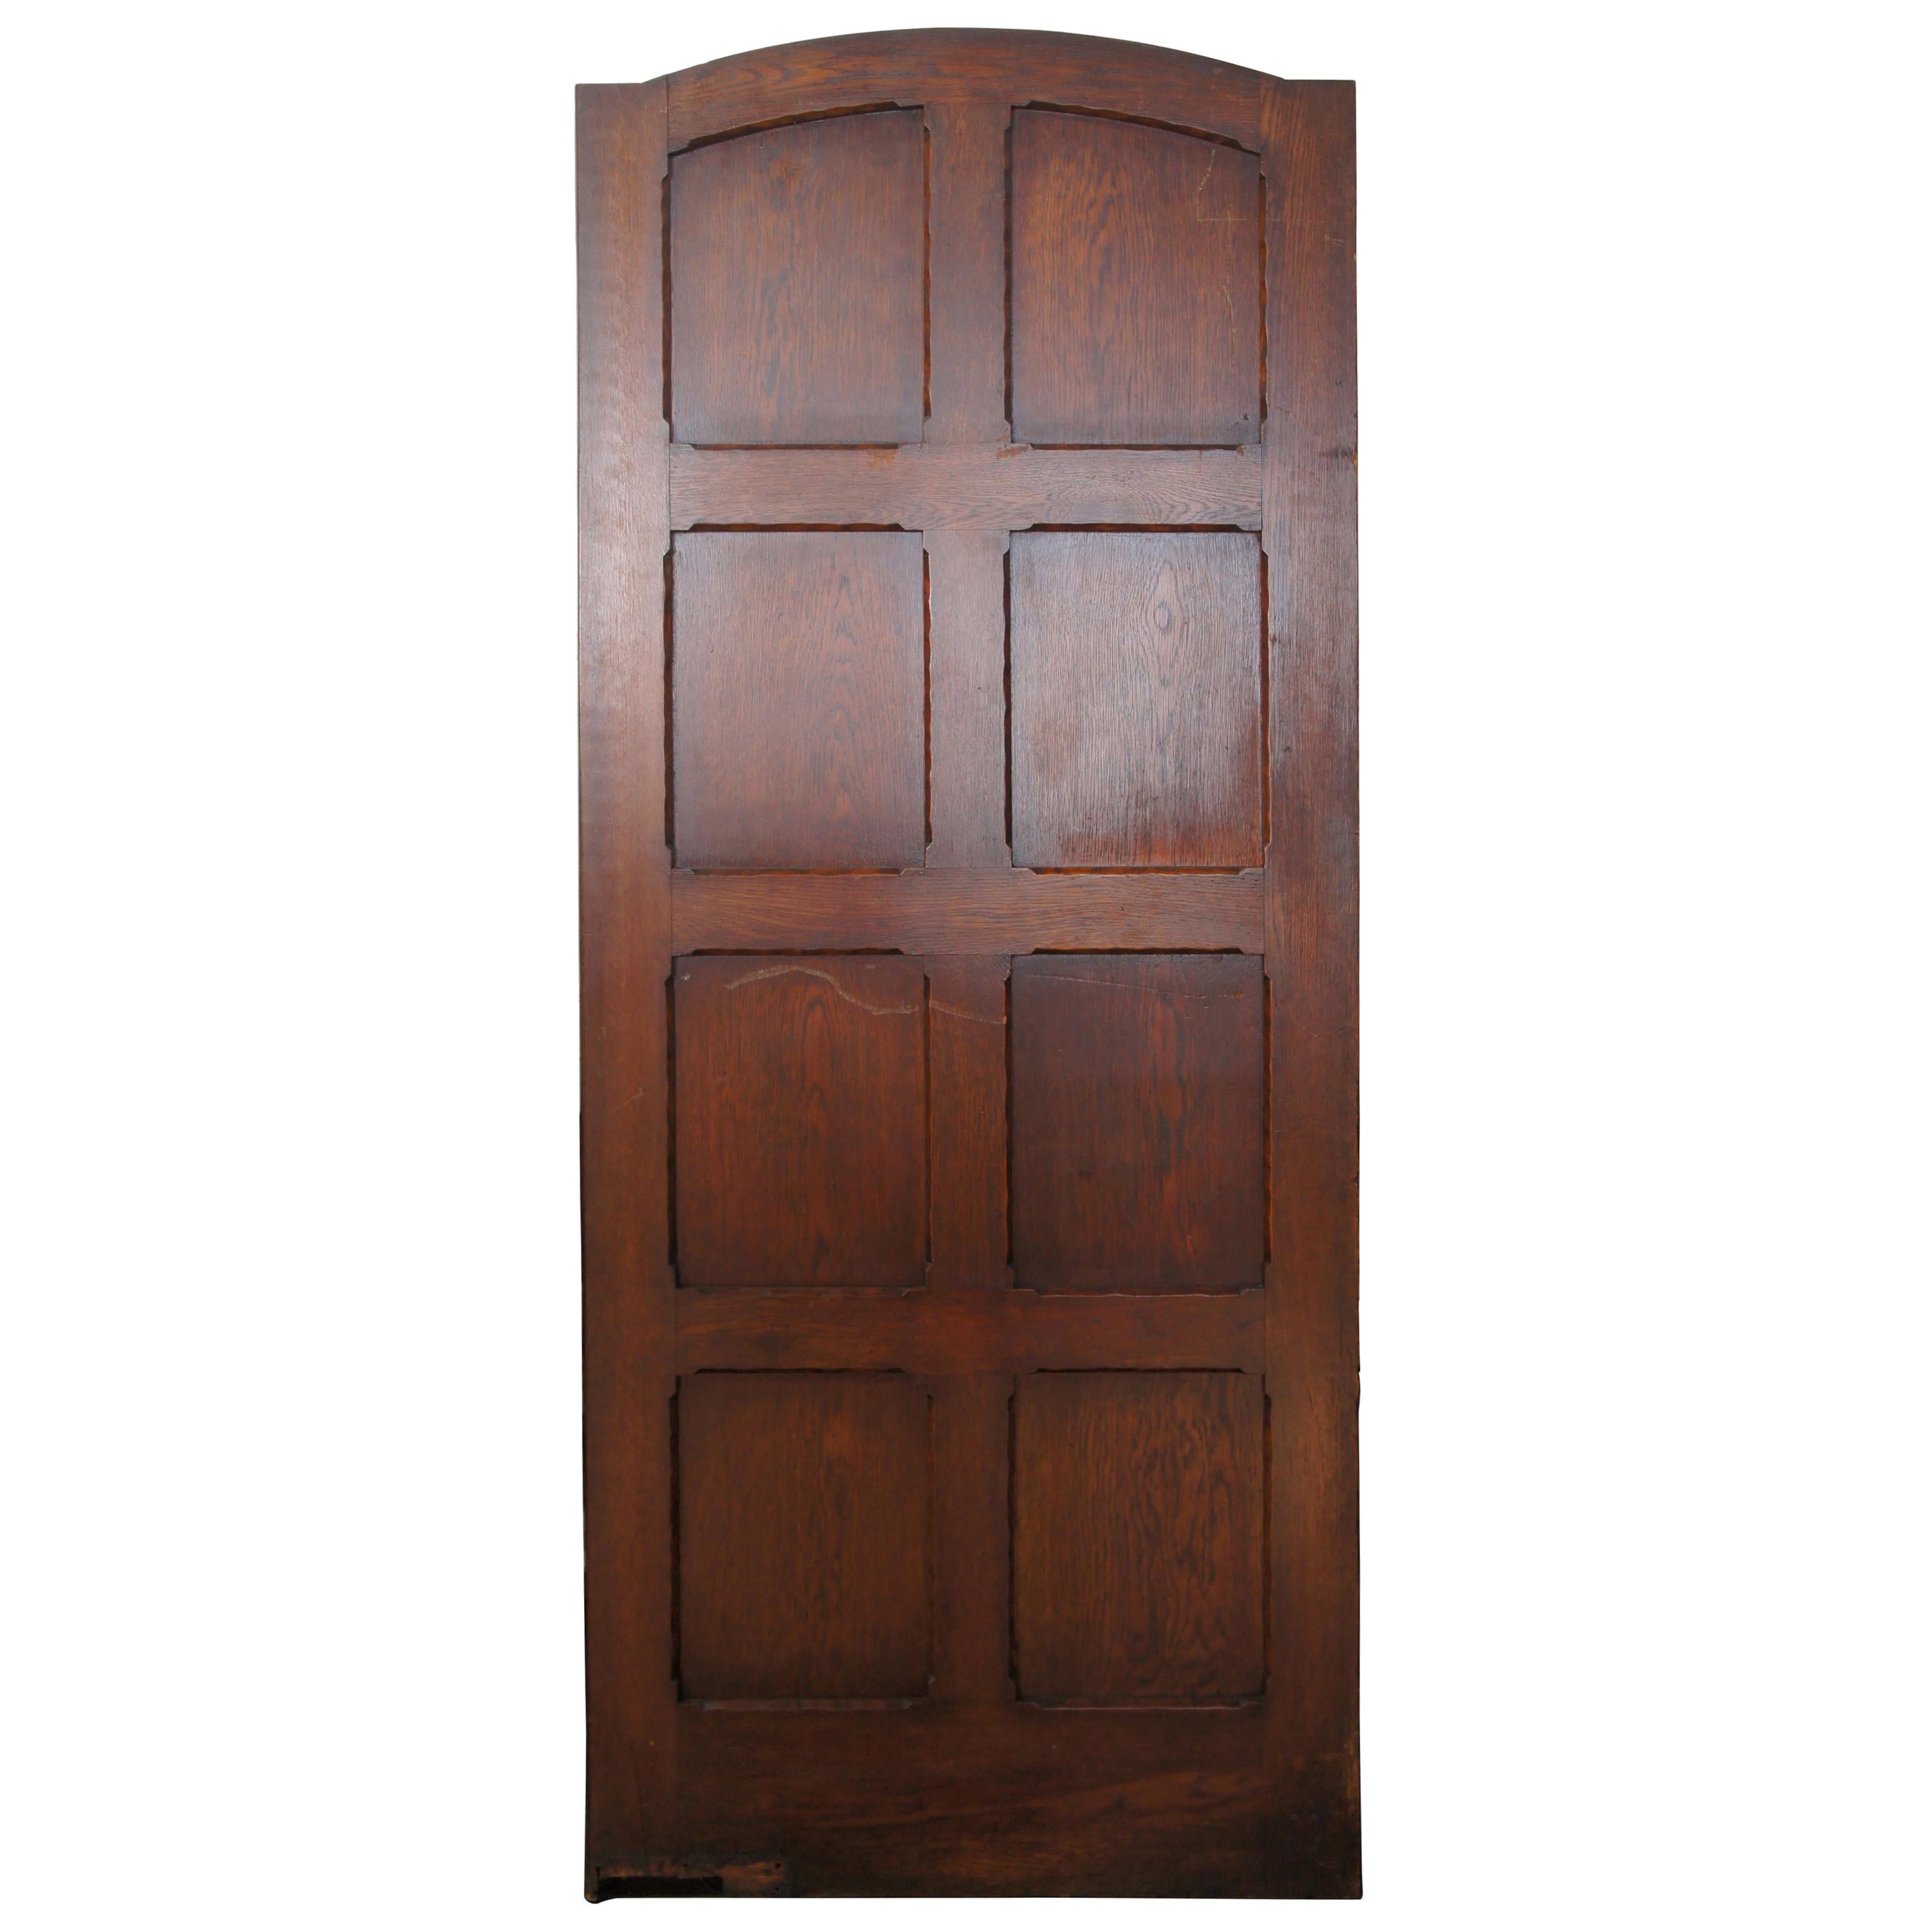 Antique Reclaimed Spanish Revival Solid Oak Arched Swinging Panel Door